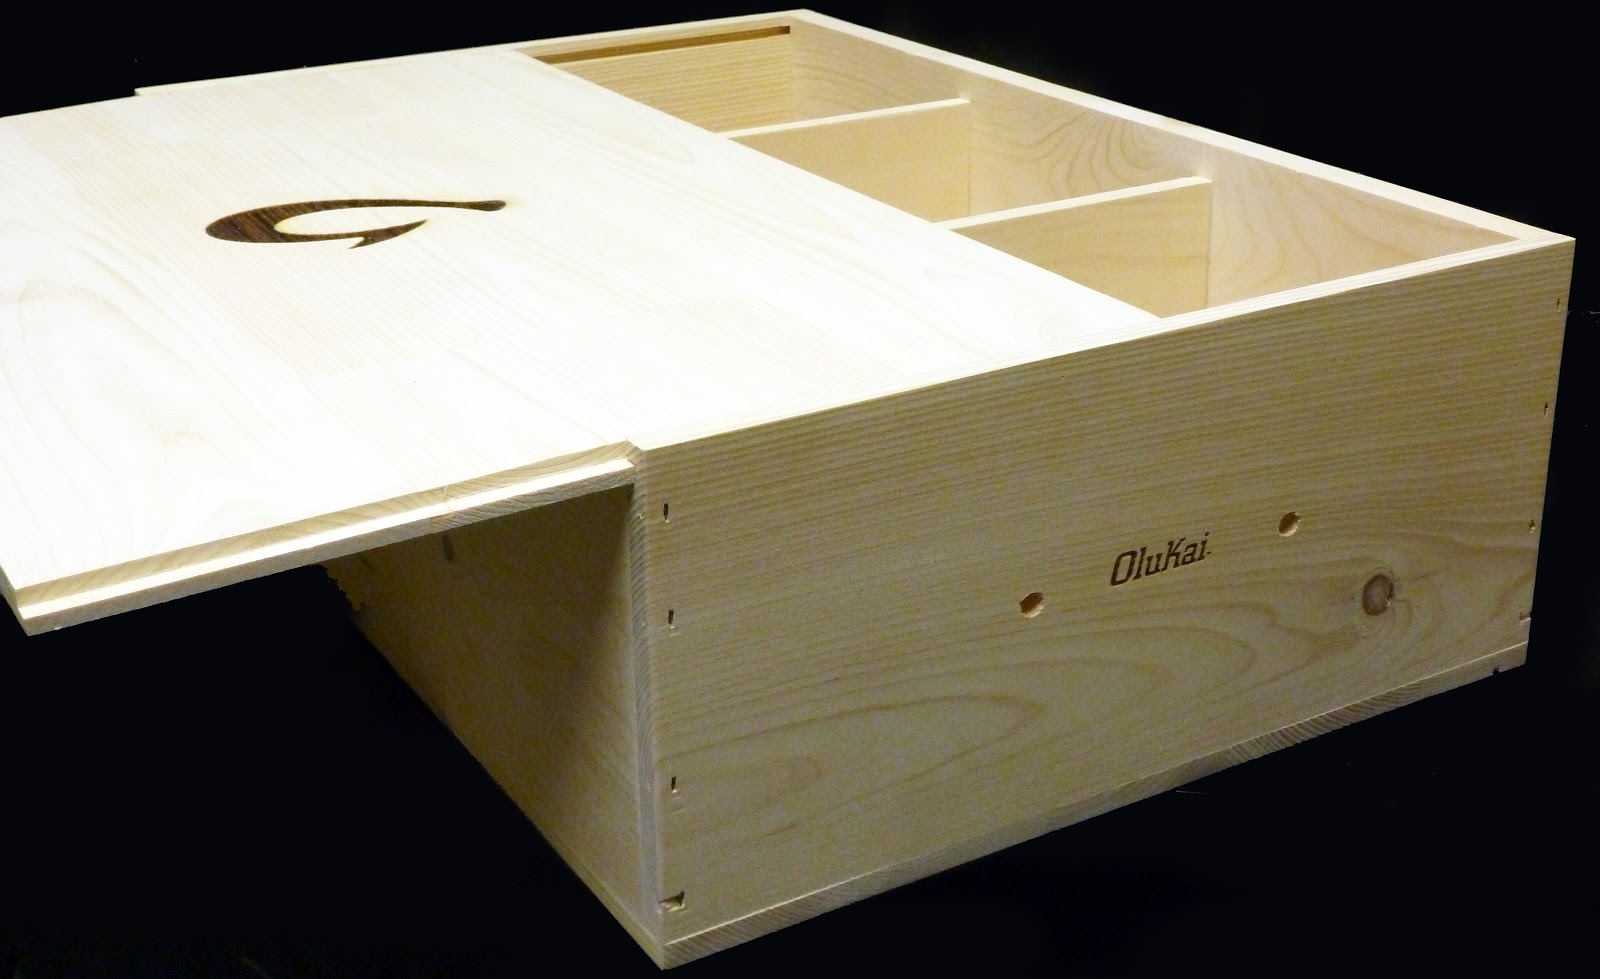 Sliding-Top Wine Boxes | DIY Woodworking Projects